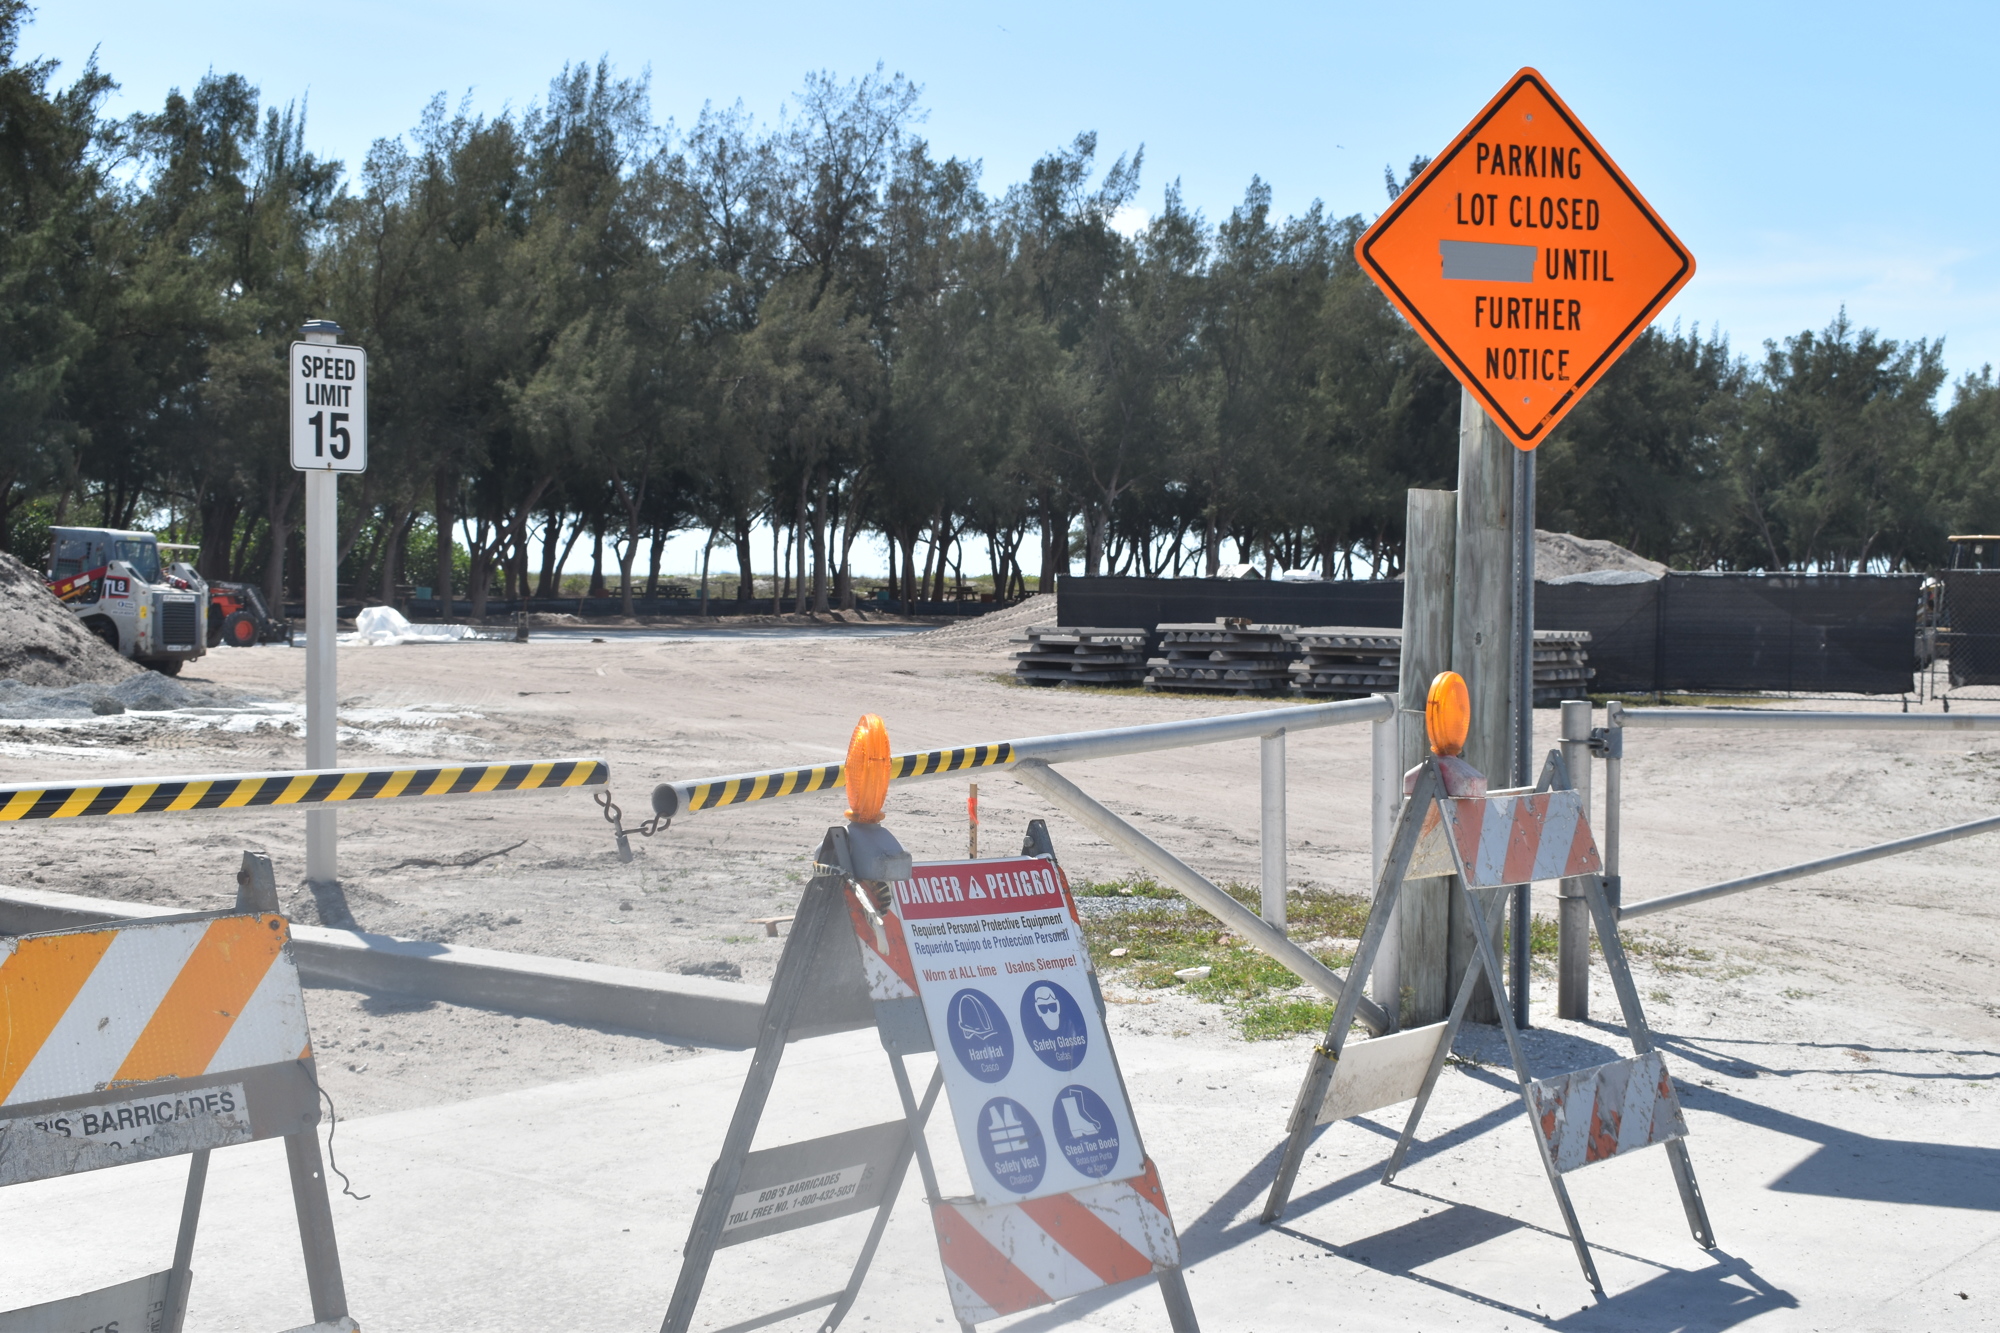 Hundreds of parking spots at Coquina Beach are closed while crews work on construction.